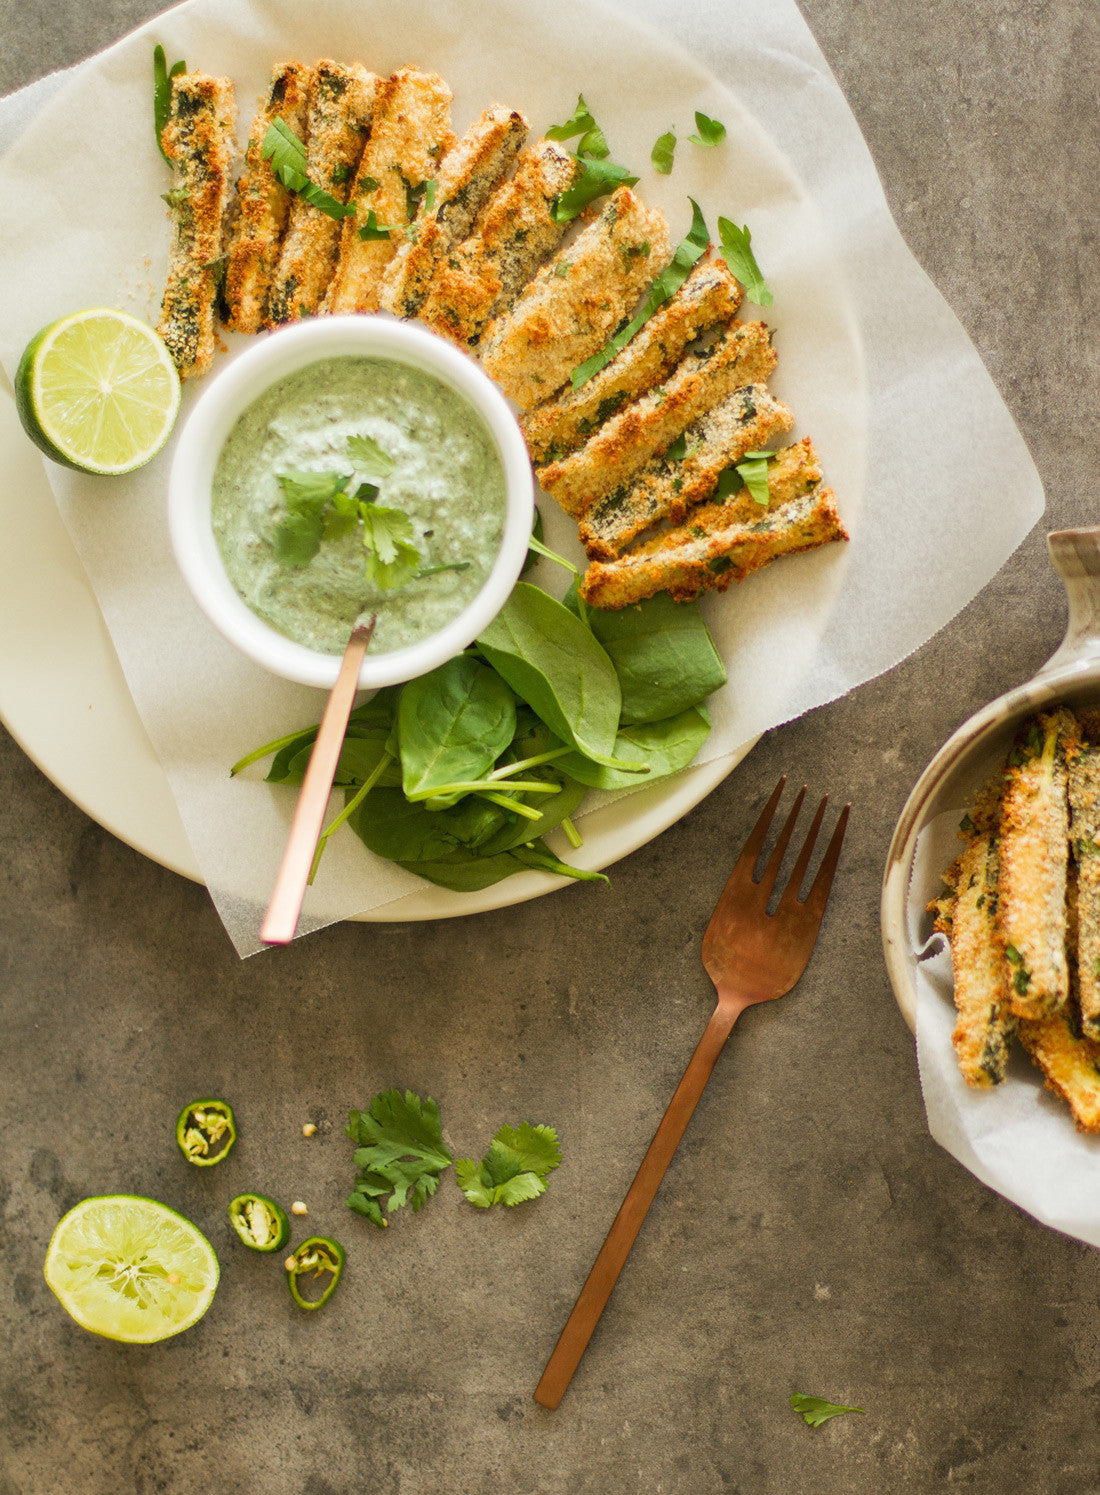 baked zucchini fries recipe with spinach, herb and onion superdip